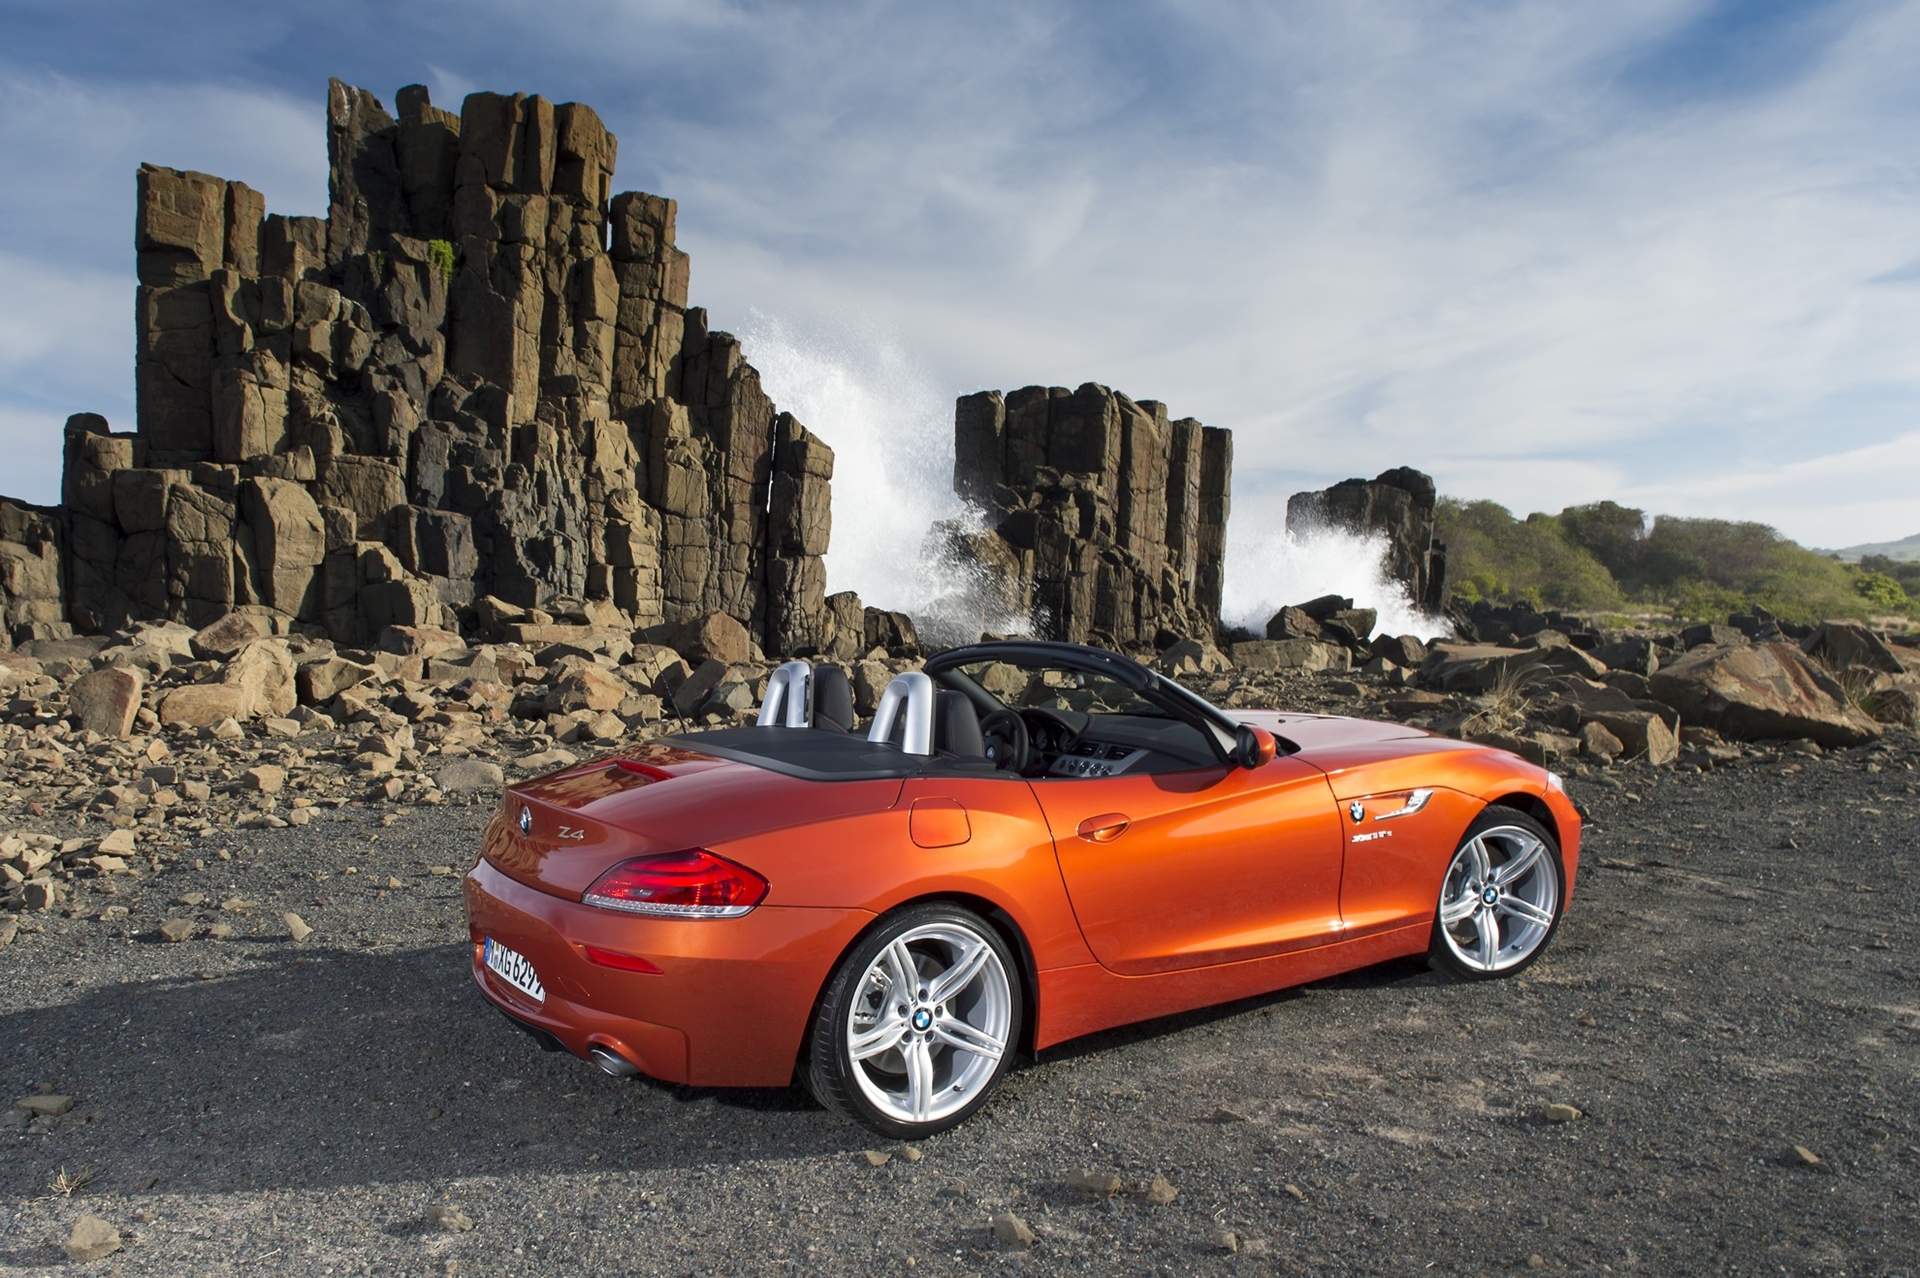 The new BMW Z4 in the United Kingdom